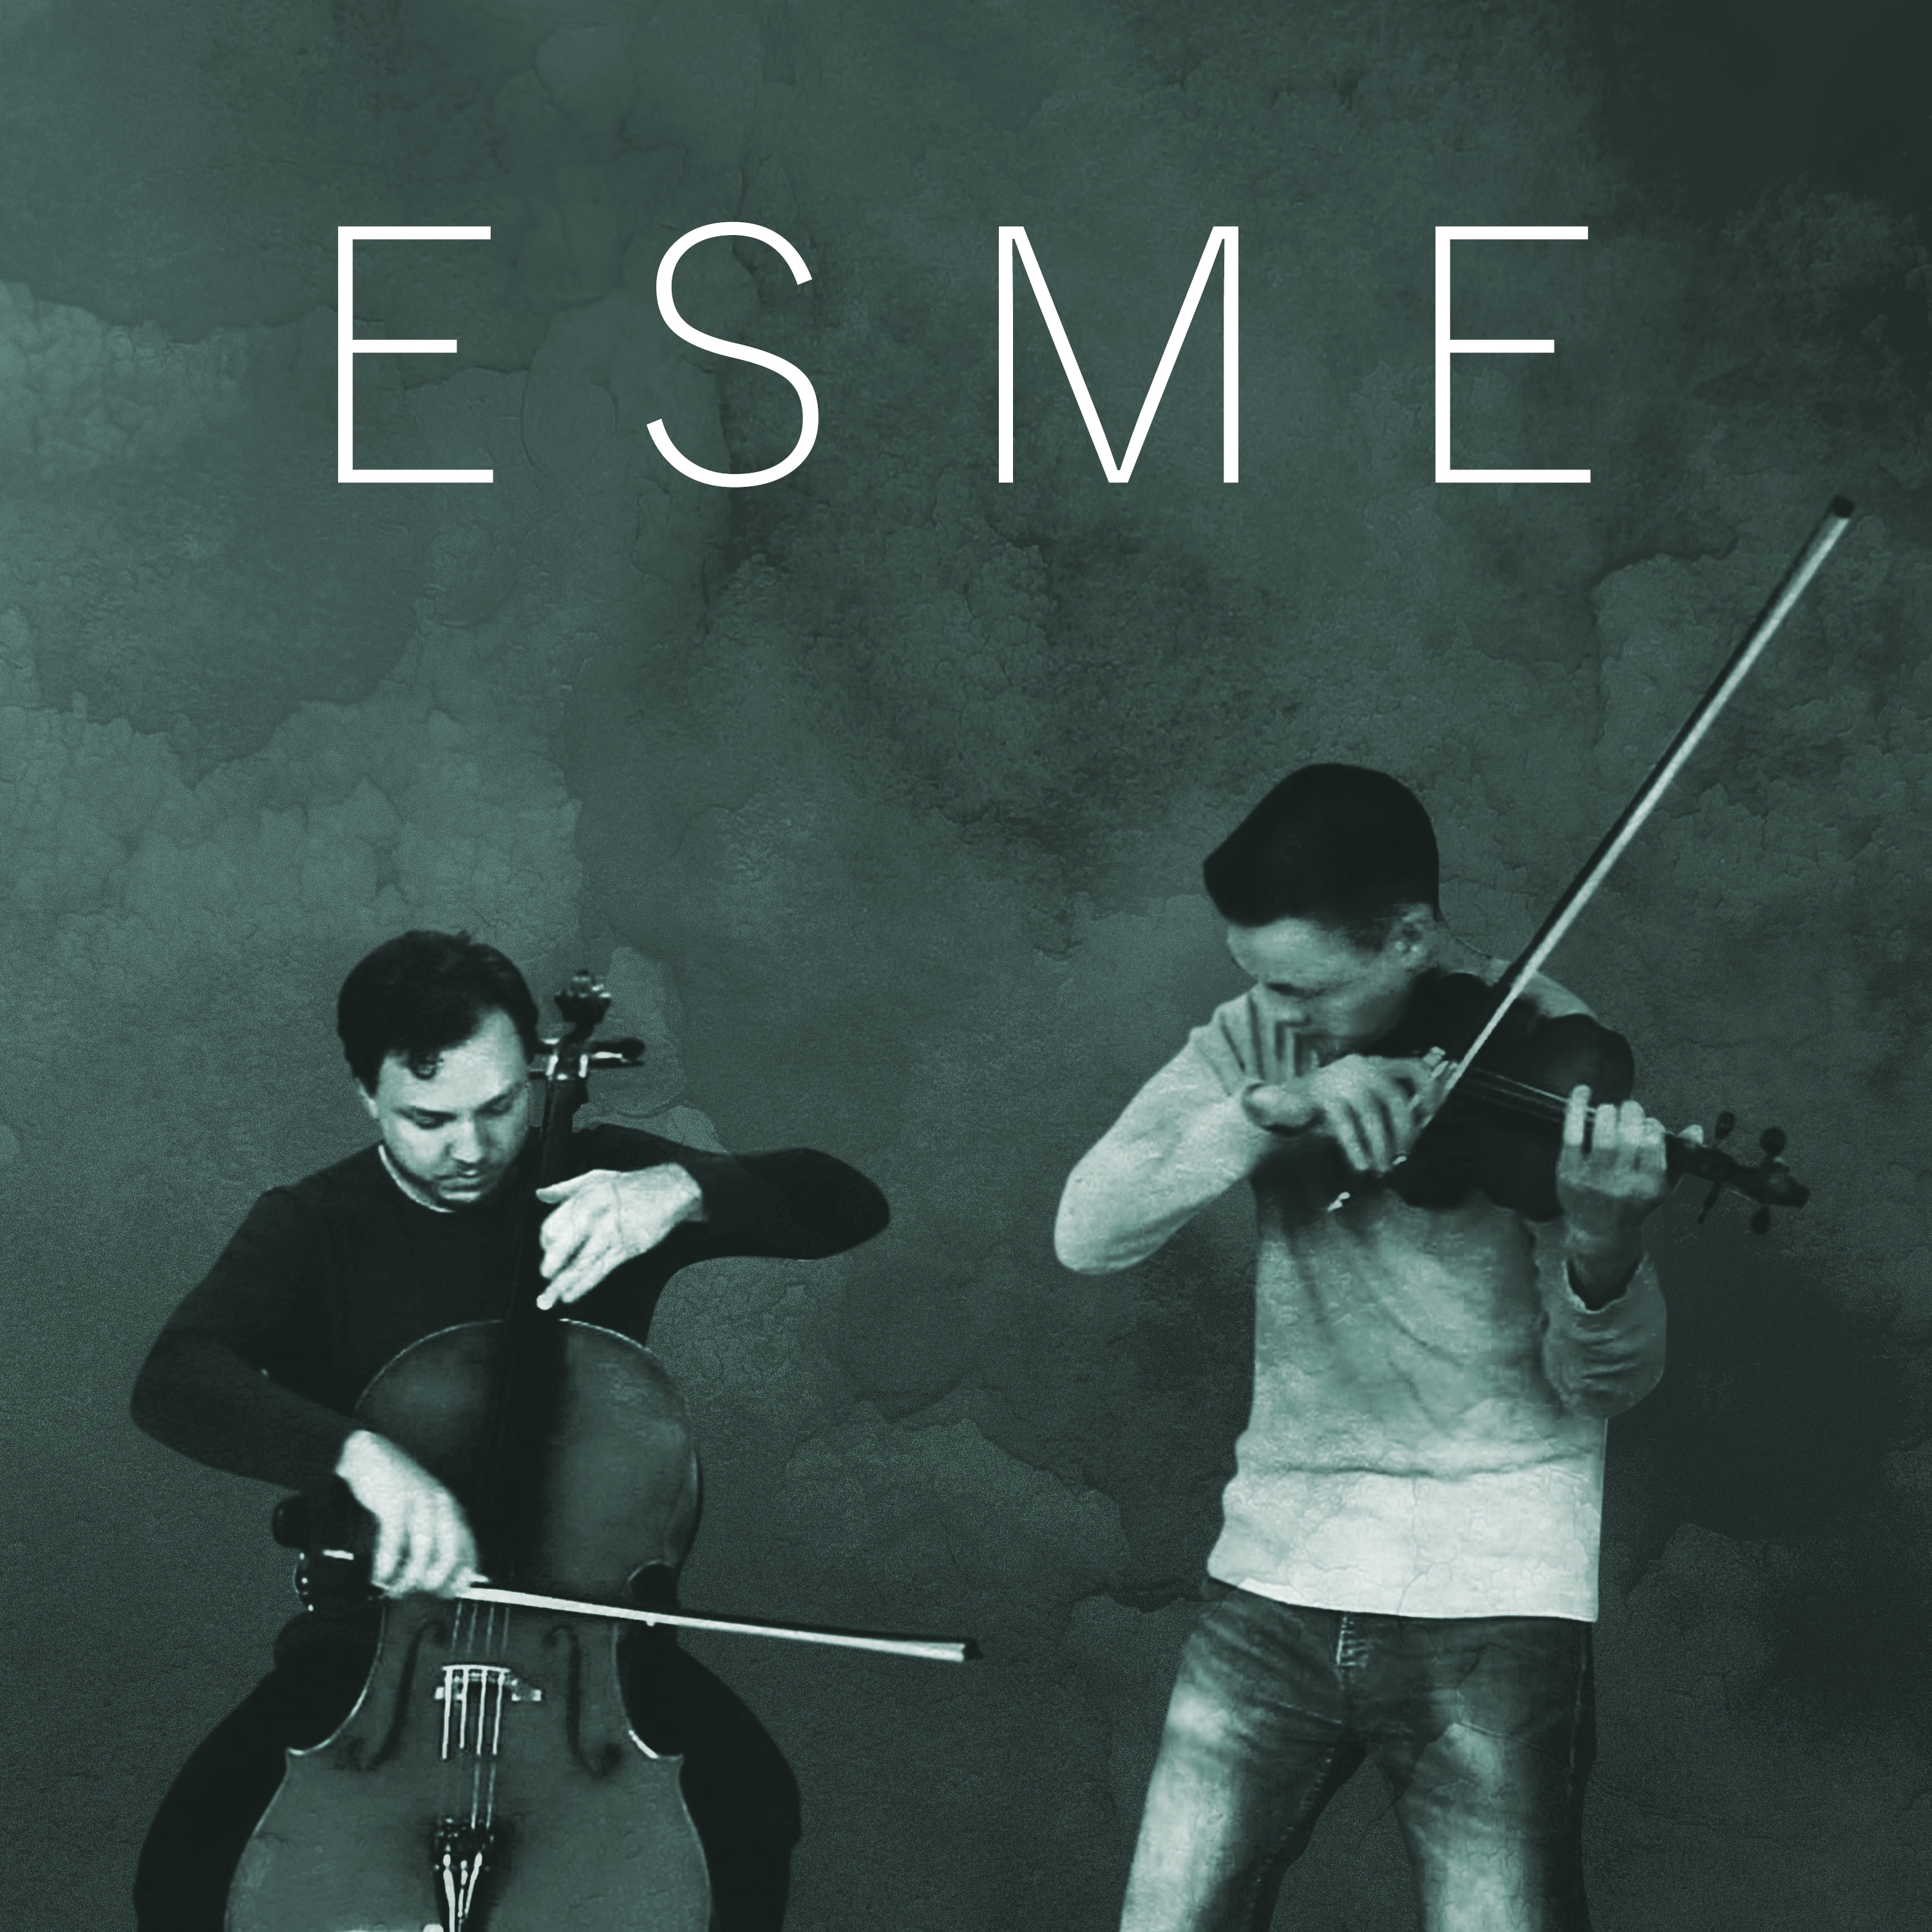 ESME: A String Group for the Age of Musical Omnivores